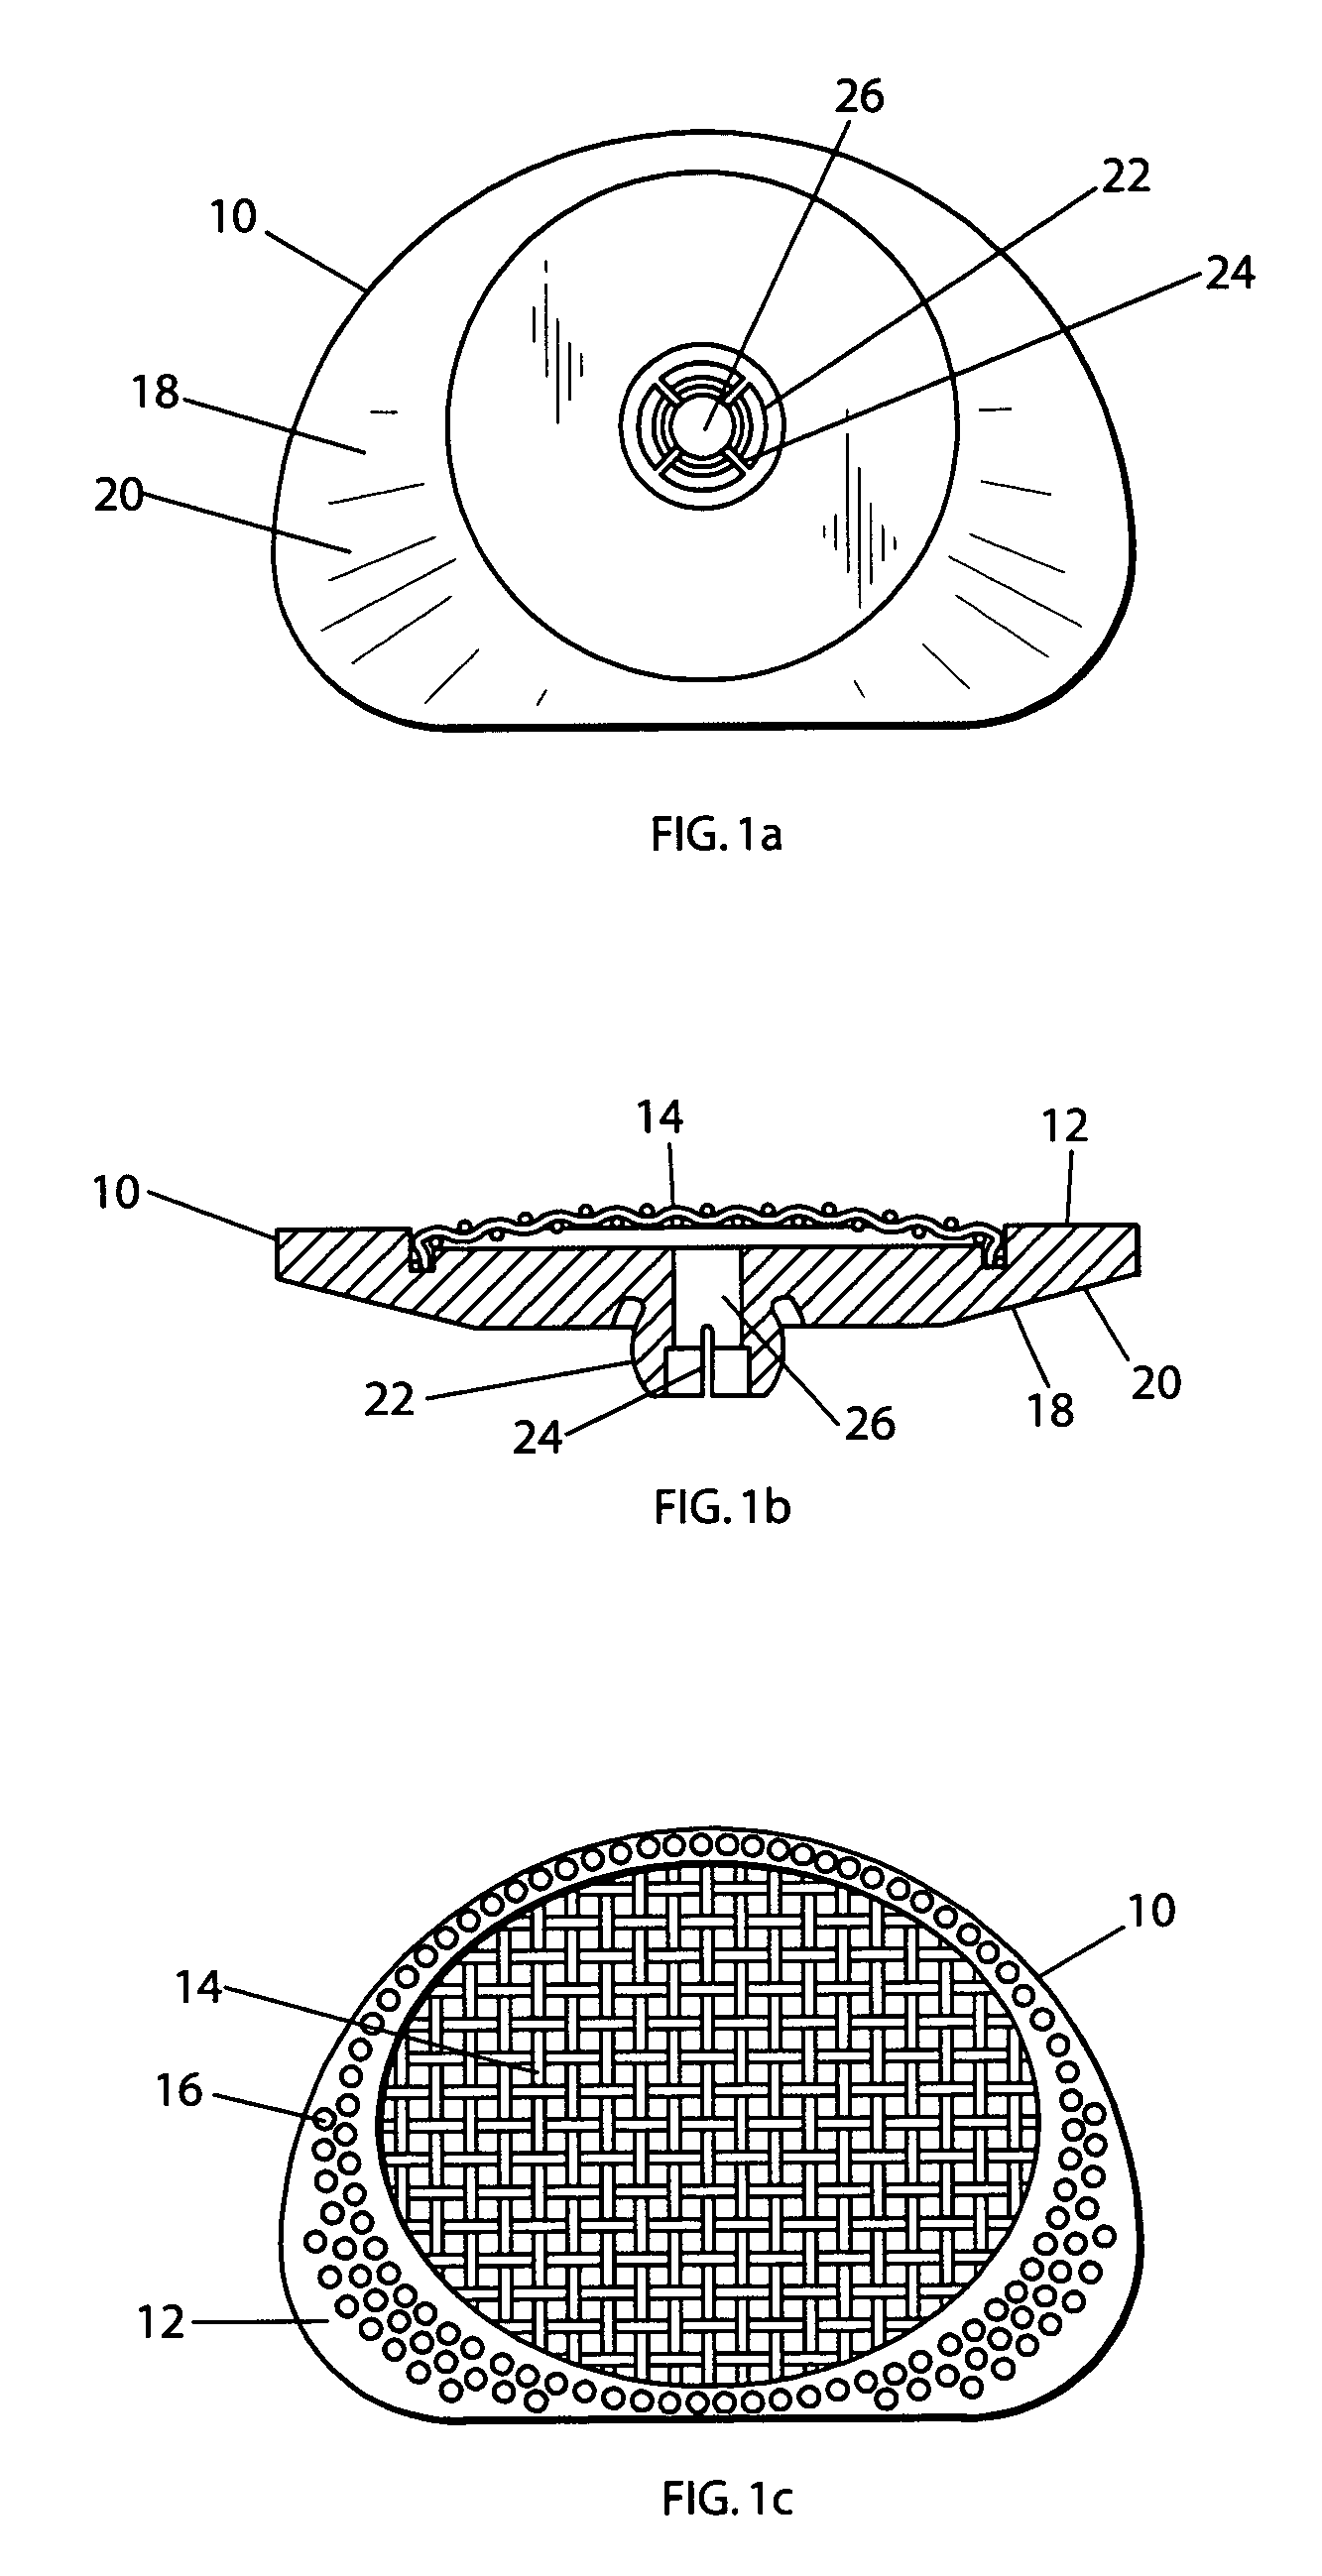 Axially compressible artificial intervertebral disc having limited rotation using a captured ball and socket joint with a solid ball and compression locking post